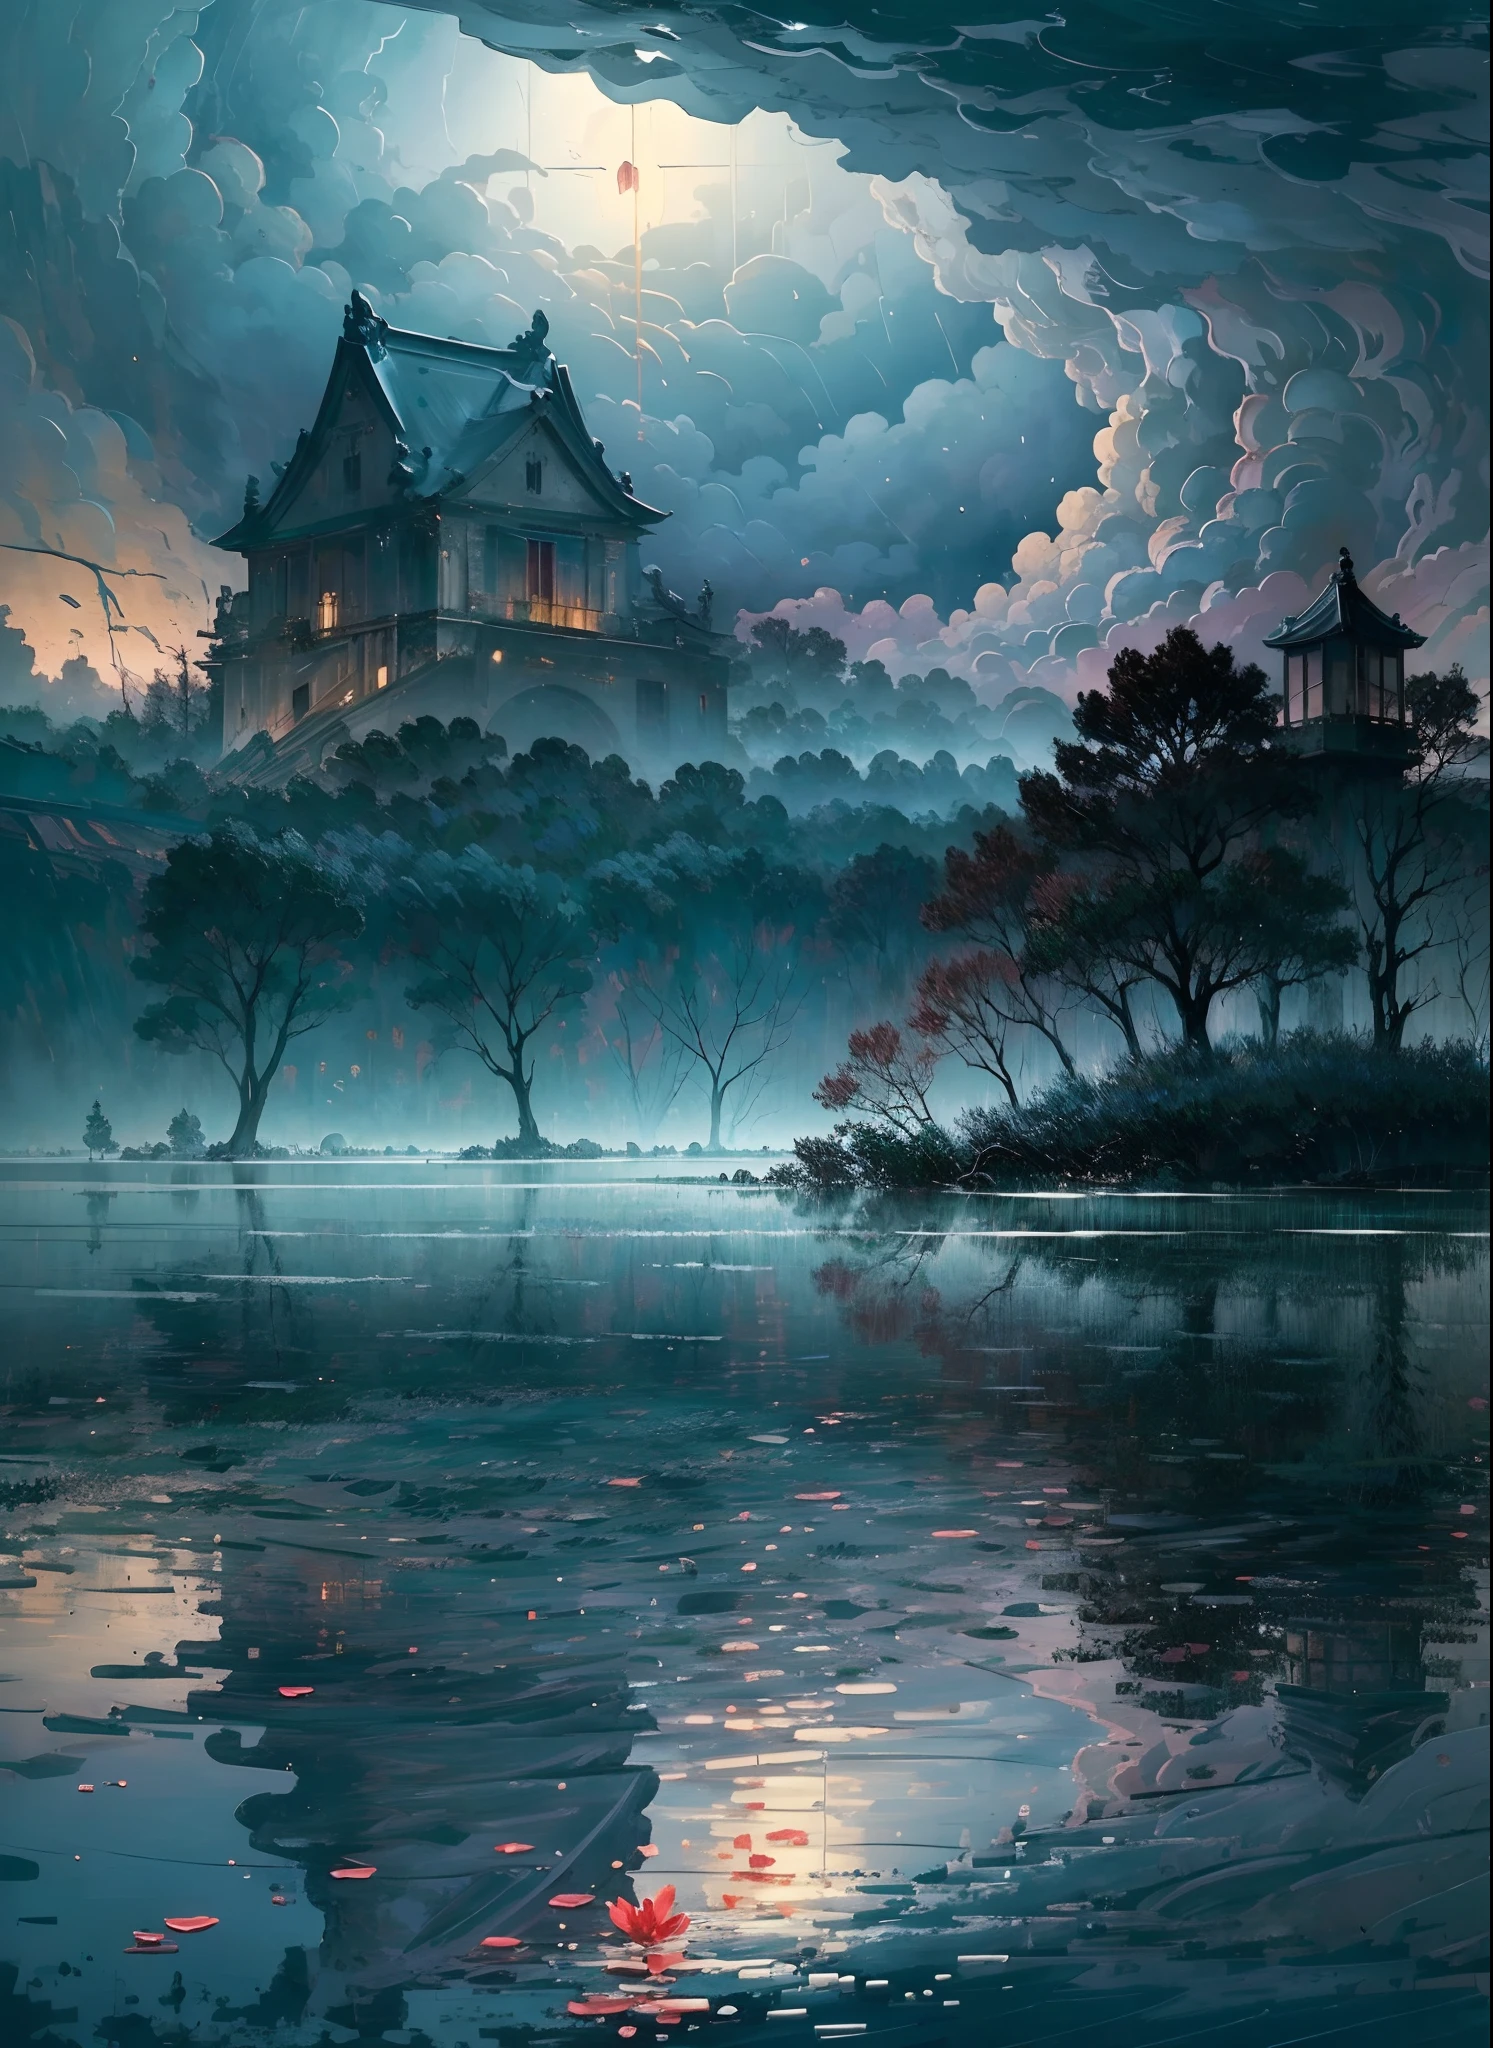 Best quality,4K,8K,A high resolution,Masterpiece:1.2,Ultra-detailed,Realistic,Photorealistic:1.37,landscape,Monet,Impresionismo,flood,illuminations,Japan culture,disaster,heavy rain,Dark clouds,Gloomy atmosphere,Flooded rivers,damaged buildings,Desolate streets,Soaked landscape,Ripple water reflection,Waterlogged trees,Moody lighting,Brush Strokes,A peaceful garden with cherry blossoms,Sparse cherry petals,floating debris,Turbulent waves,ominous storm clouds,Subtle color palette,Soft lighting,Sinister emotions,Crumbling building,Abandoned temple,Unforgettable scenery,A mysterious mist shrouded the scene,Ominous silence,Breathtaking but melancholic scene,The juxtaposition of natural beauty and destruction,The  figure stood in the chaos,Think about the power of nature,A charming blend of tranquility and chaos,Visually striking and emotionally evocative artwork,Showcasing the delicate balance between man and nature,Convey a feeling of wonder and awe.